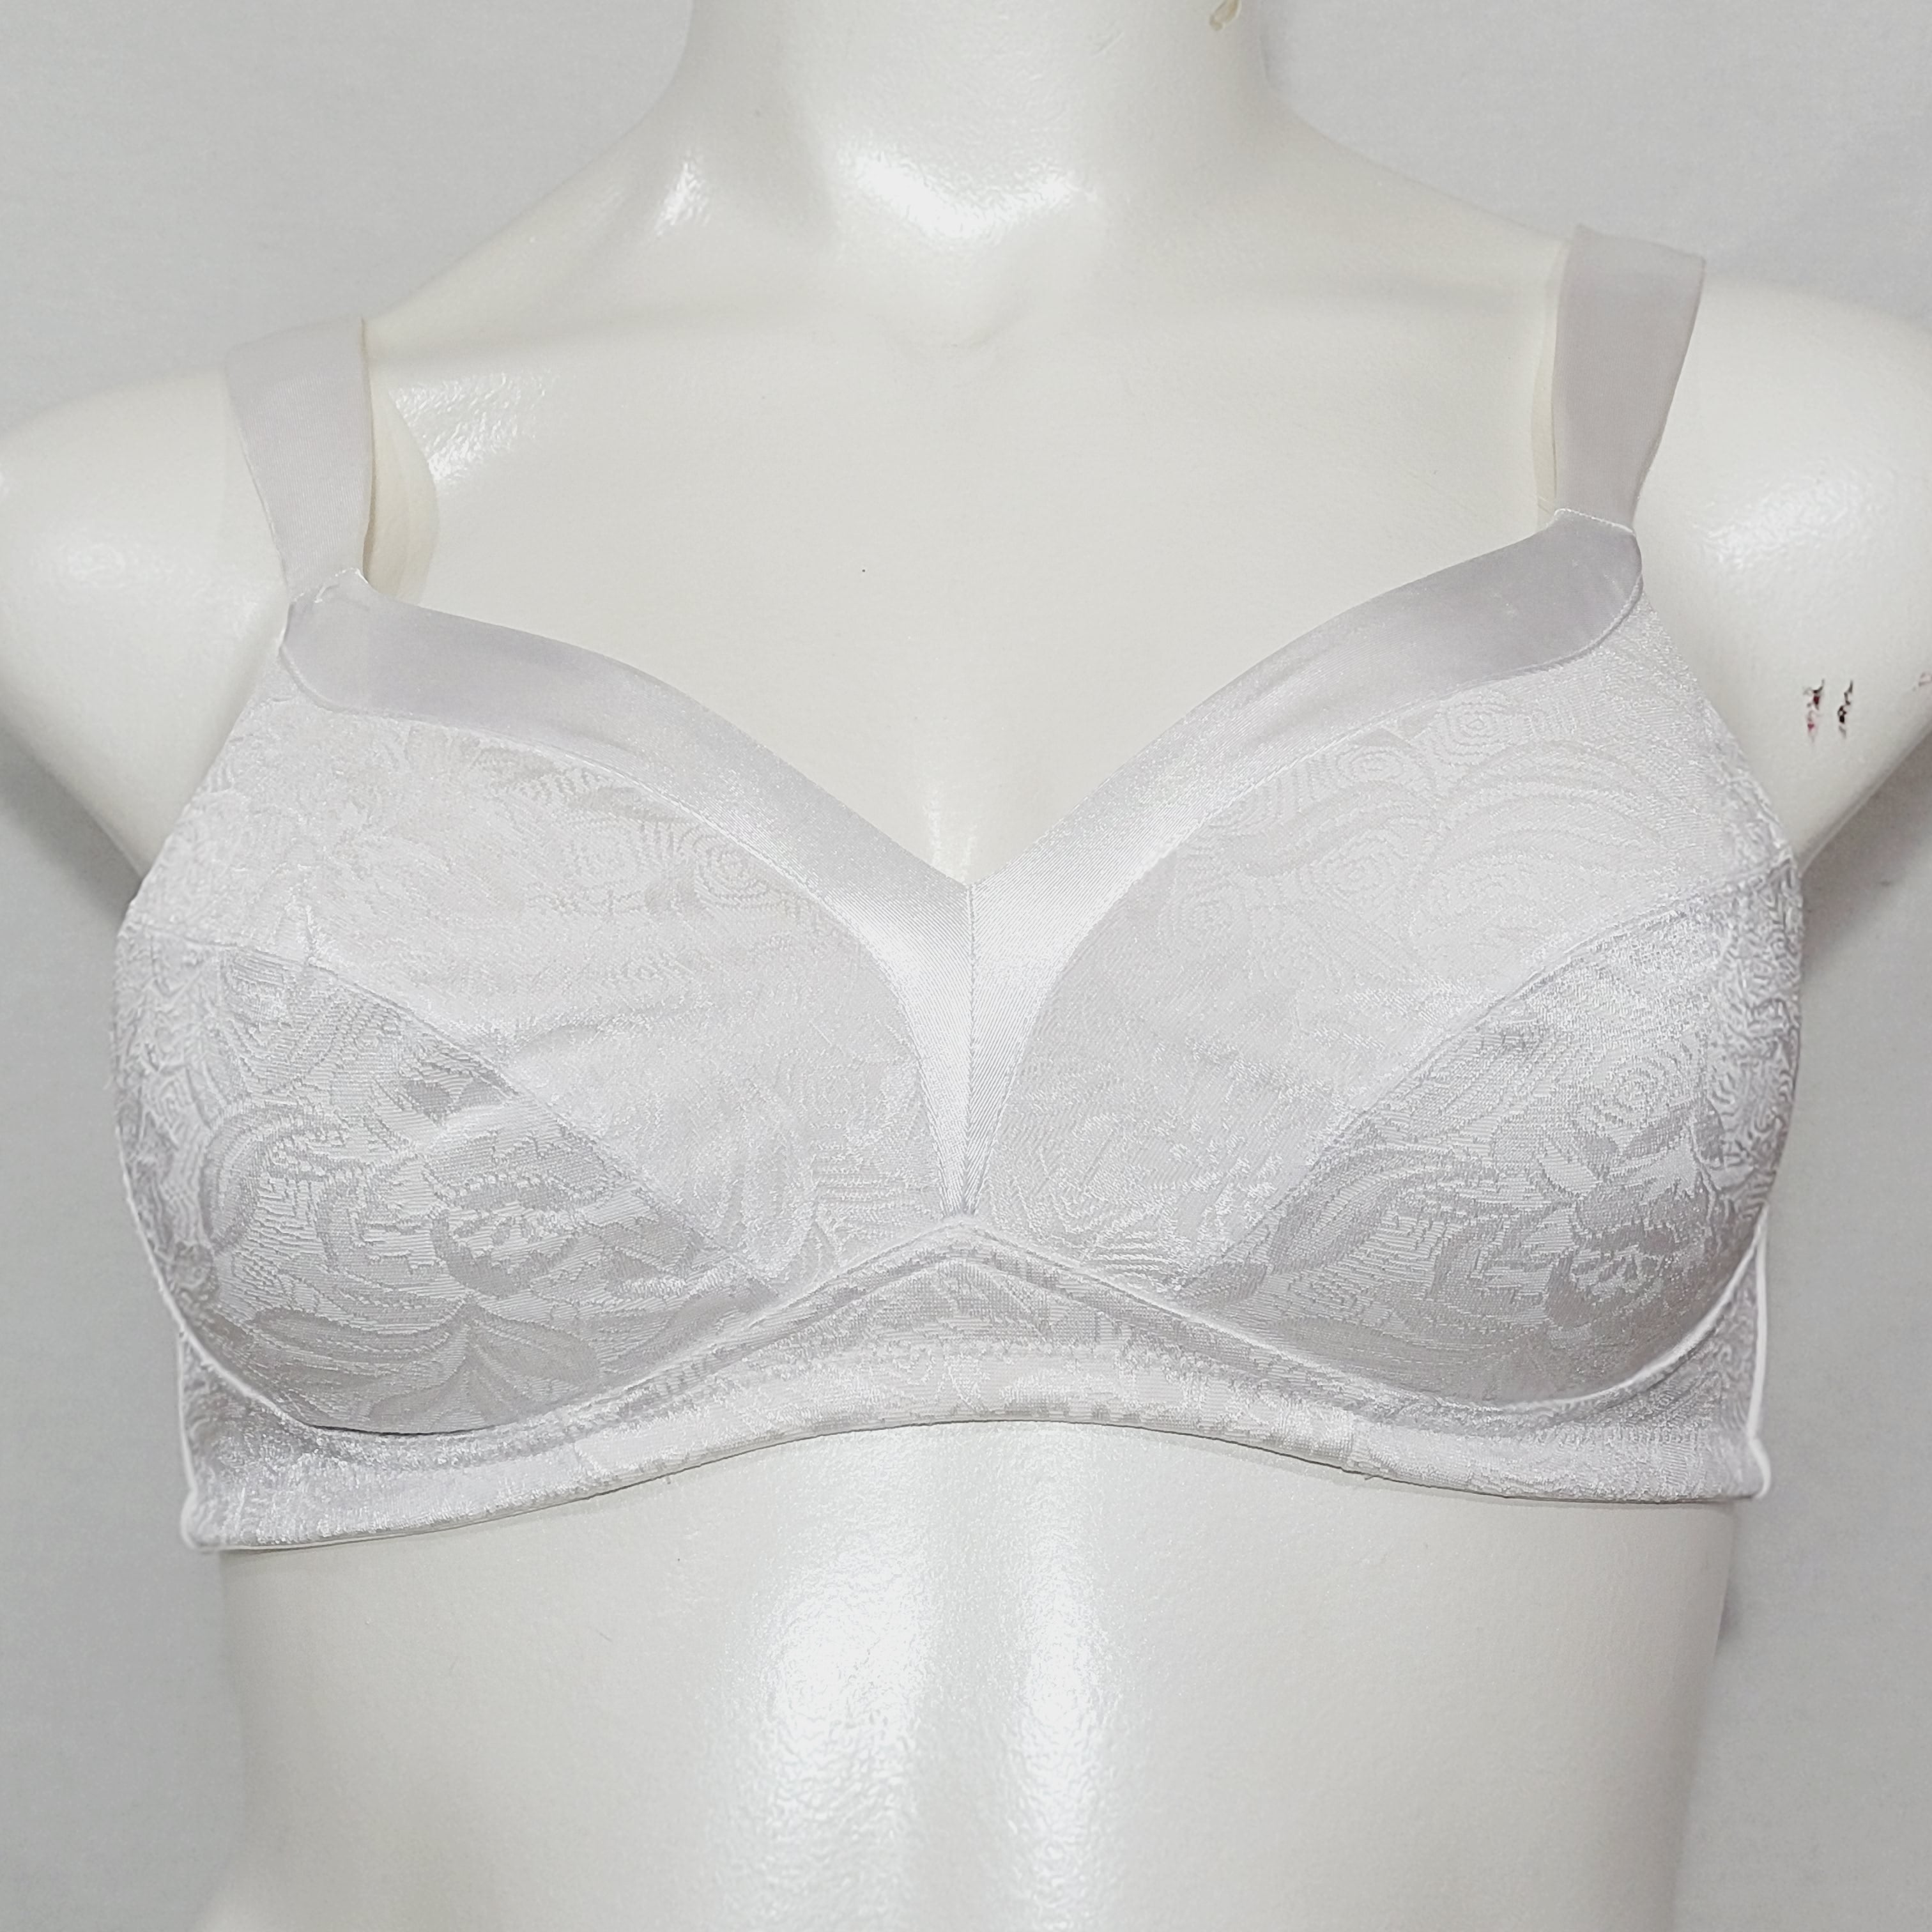 Underwire in 50A Bra Size White by Leading Lady Comfort Strap Plus Size